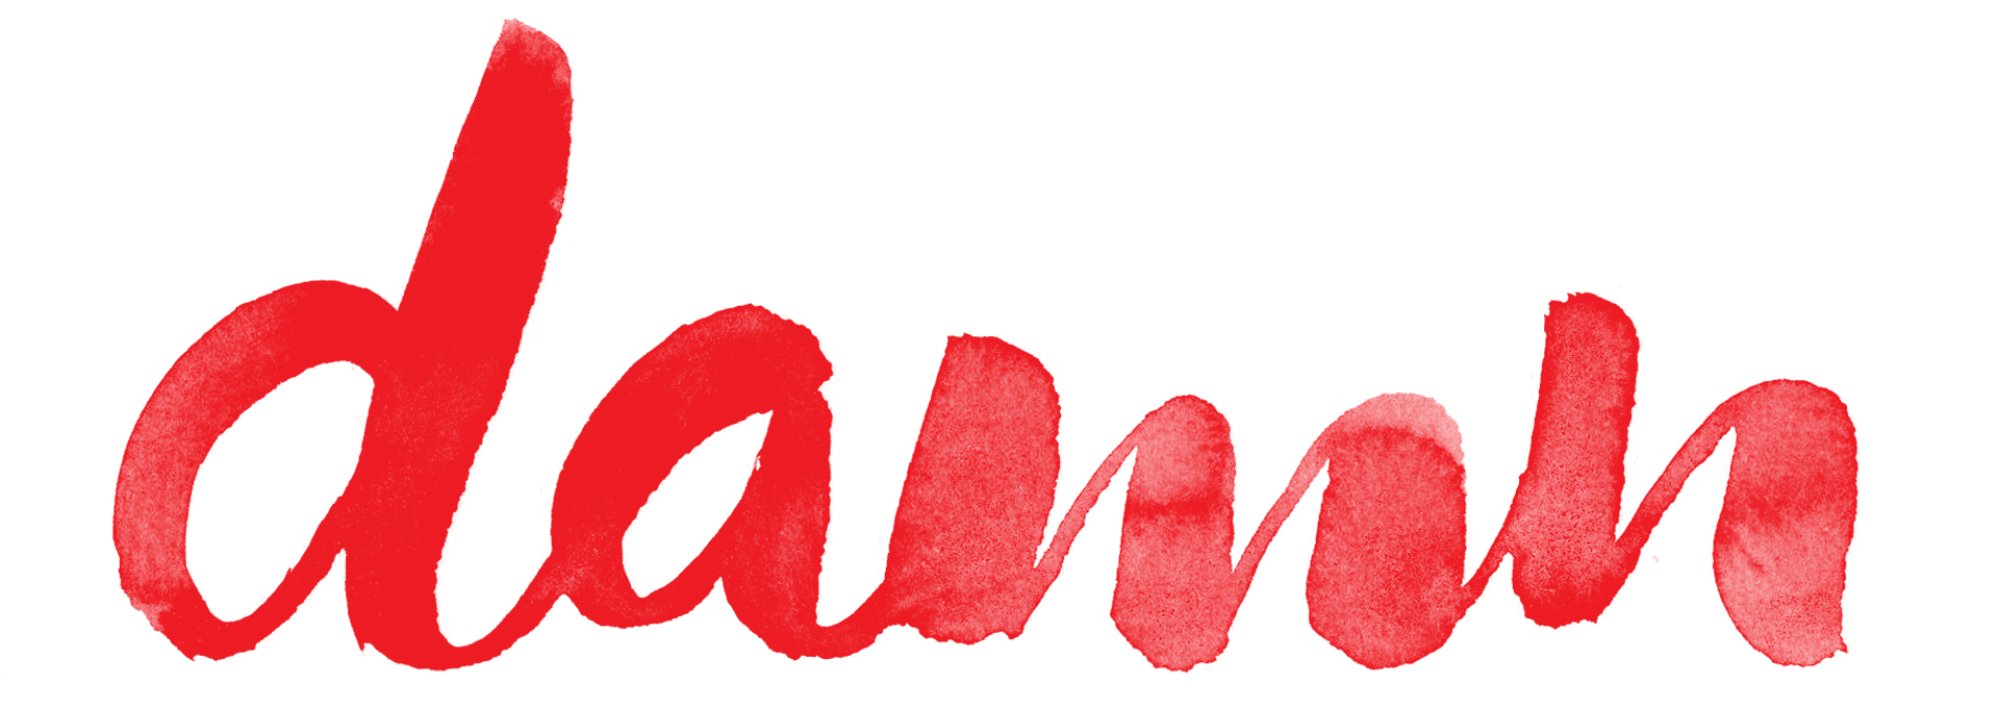 The word "damn" in red cursive lettering.